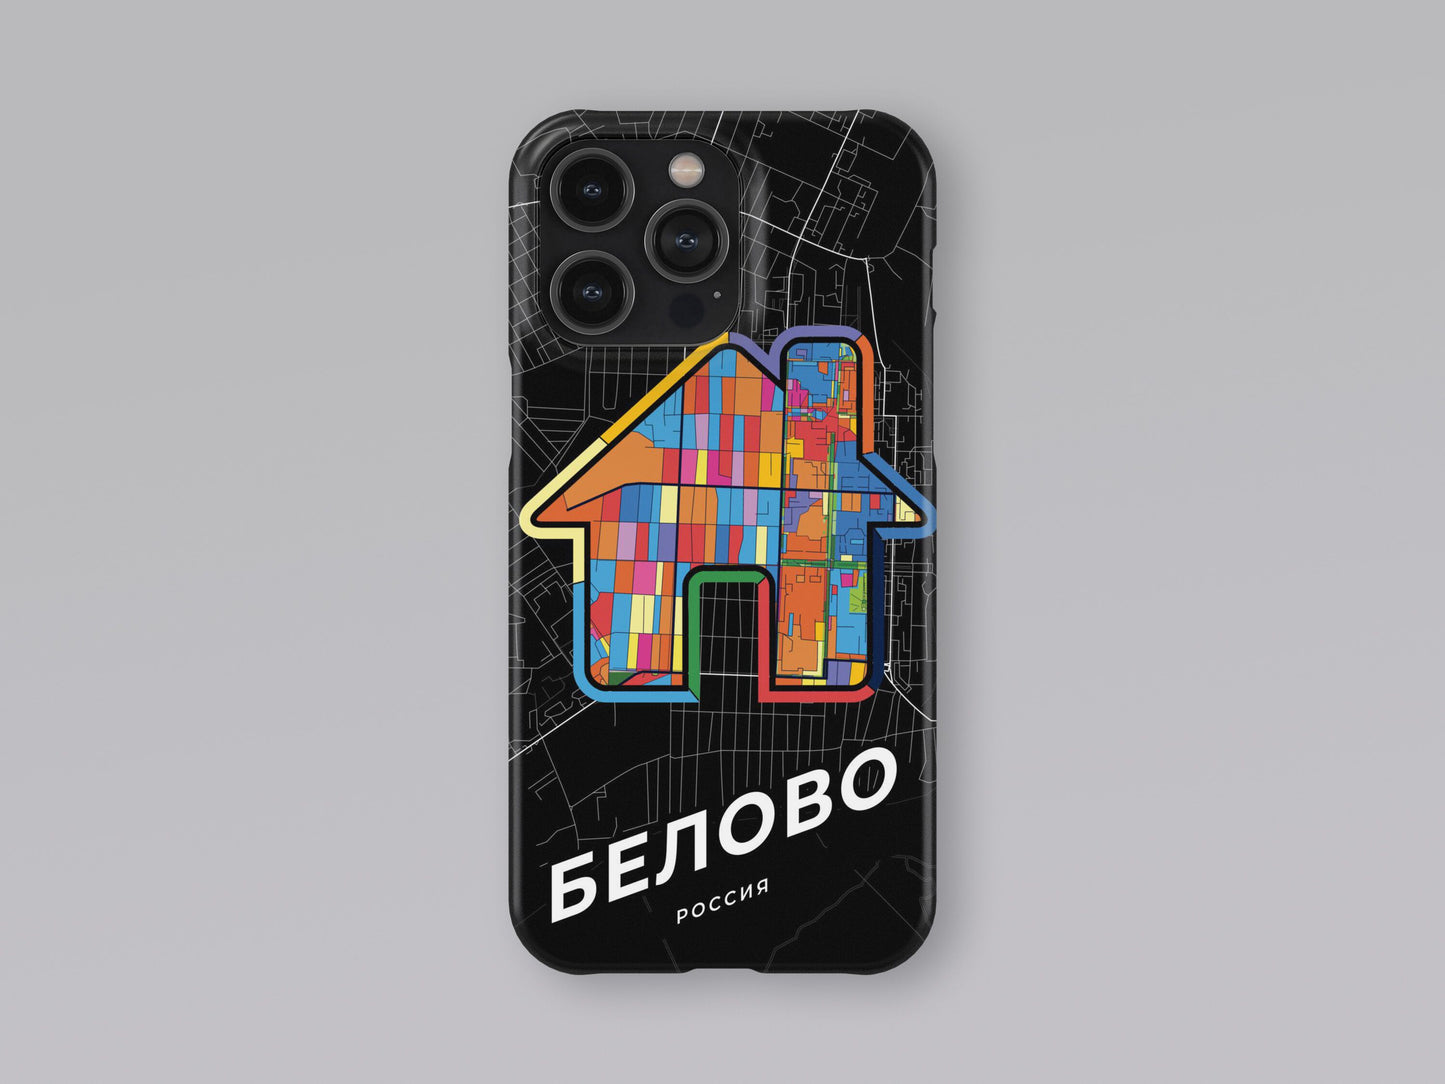 Belovo Russia slim phone case with colorful icon. Birthday, wedding or housewarming gift. Couple match cases. 3